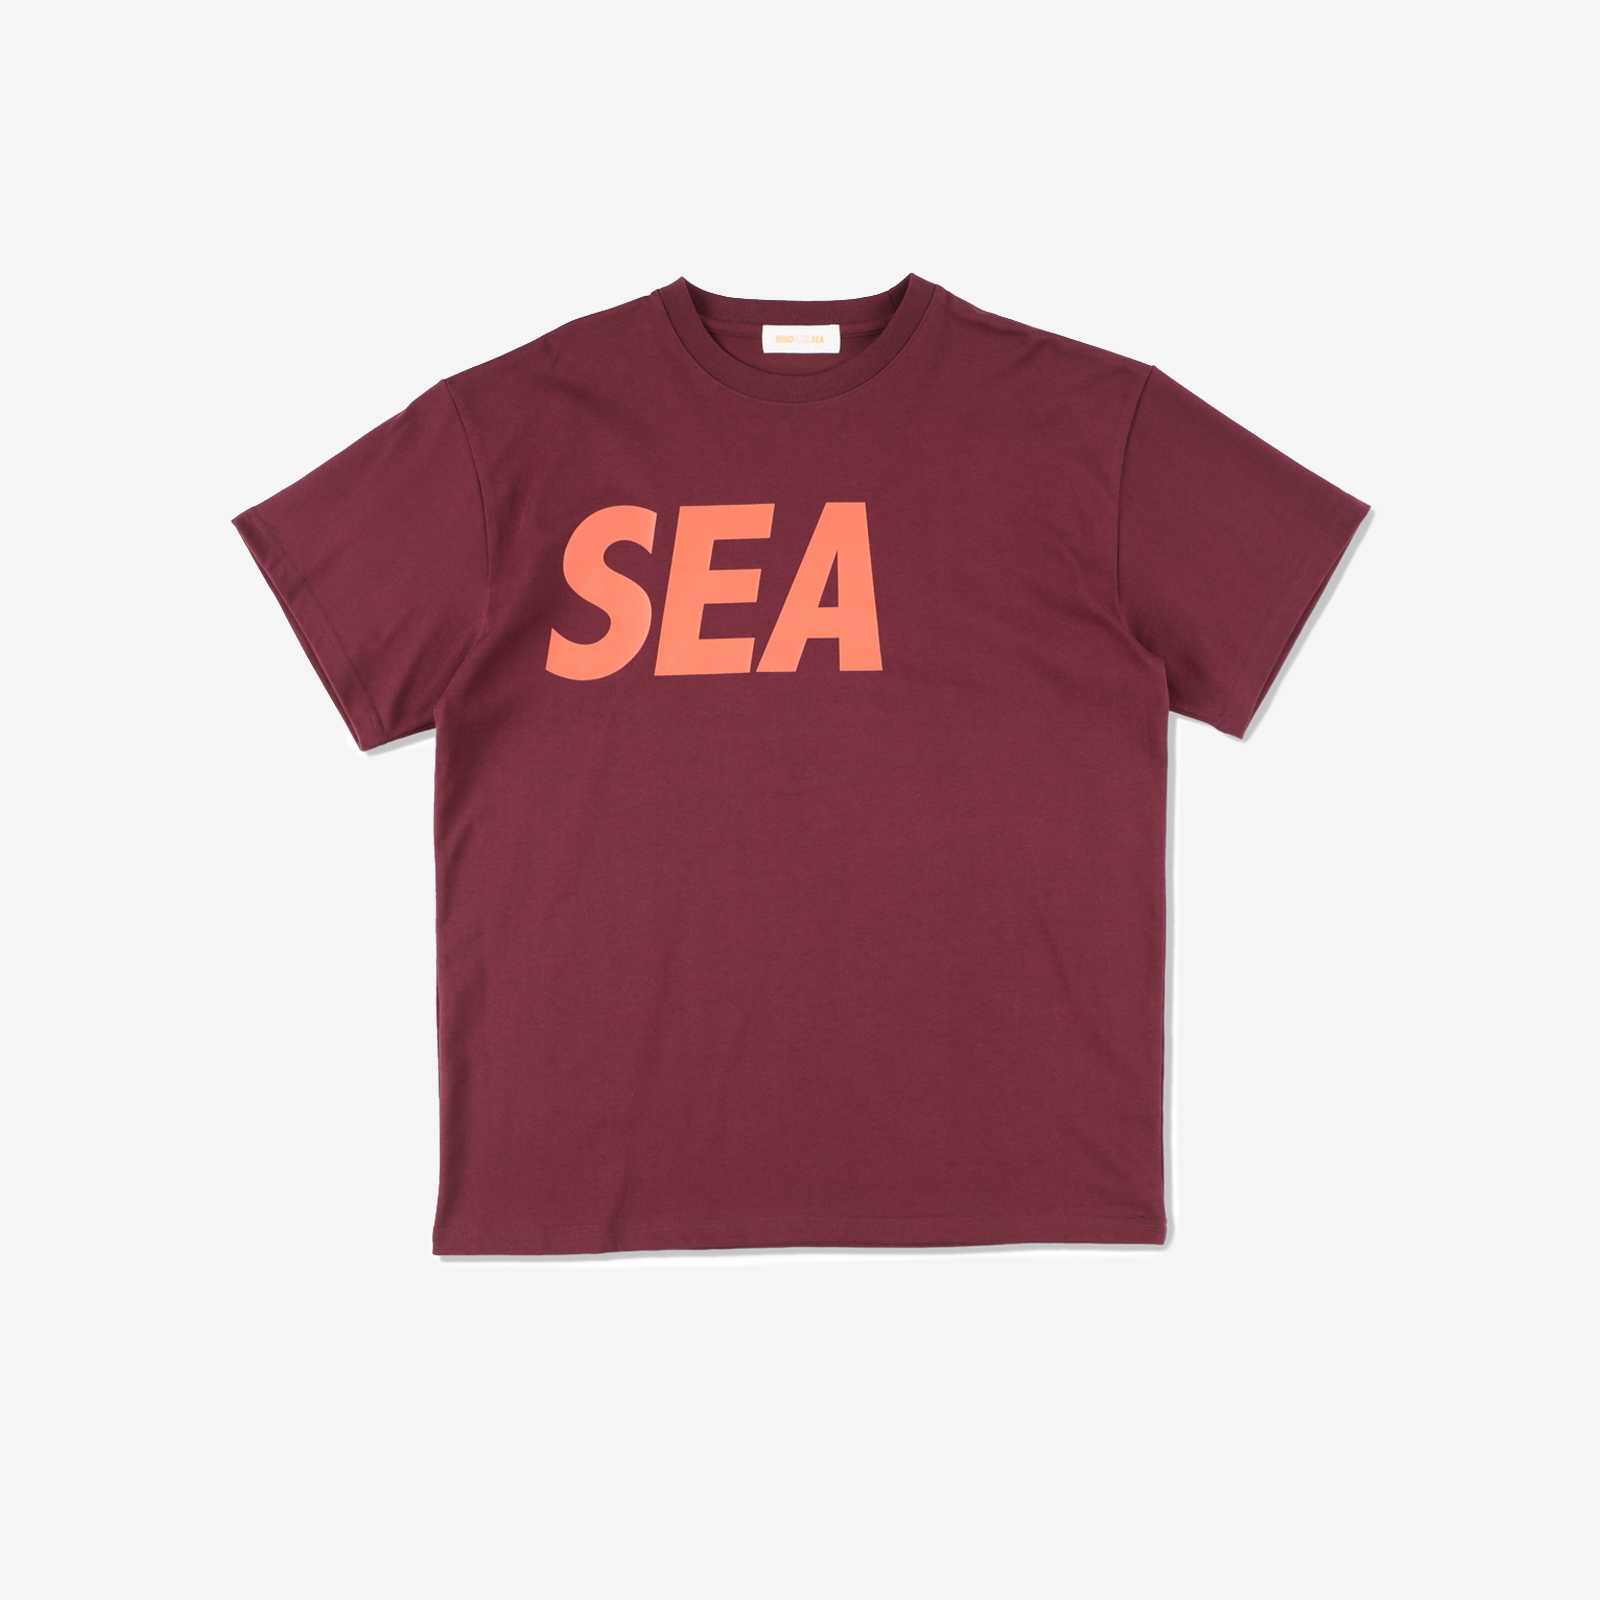 WIND AND SEA (SEA) s s t-shirt - トップス